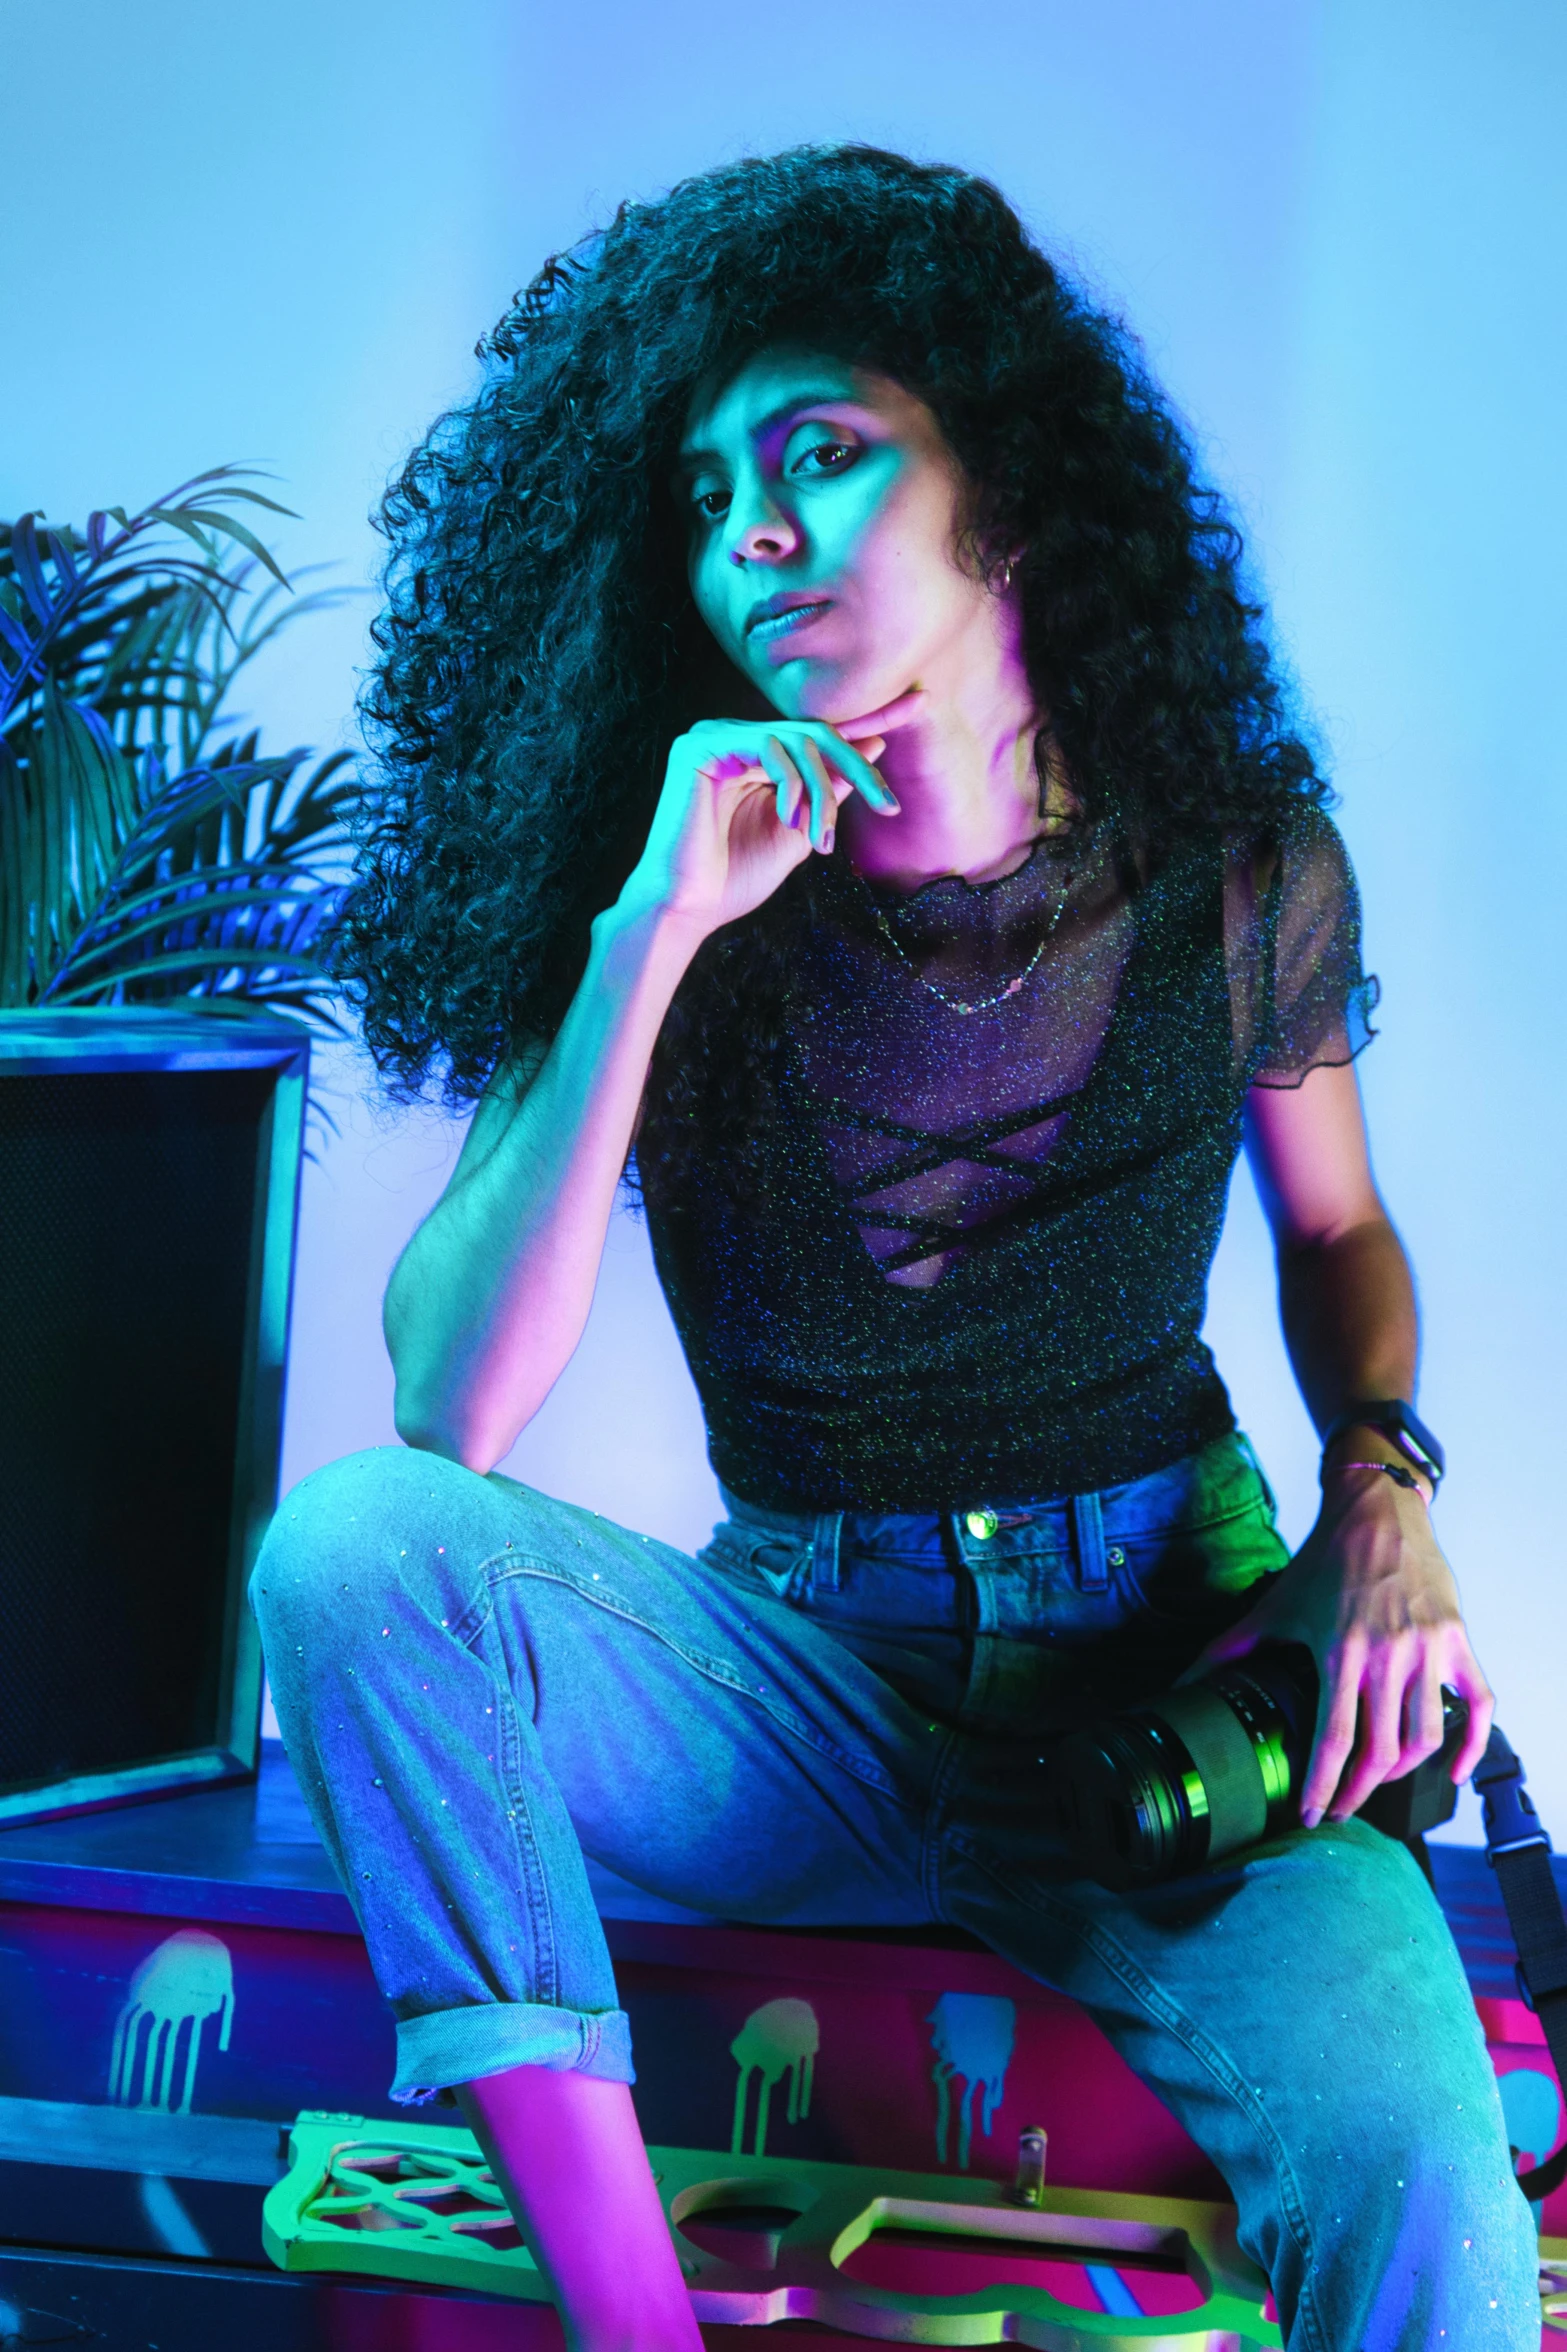 a young woman poses in the color of neon light